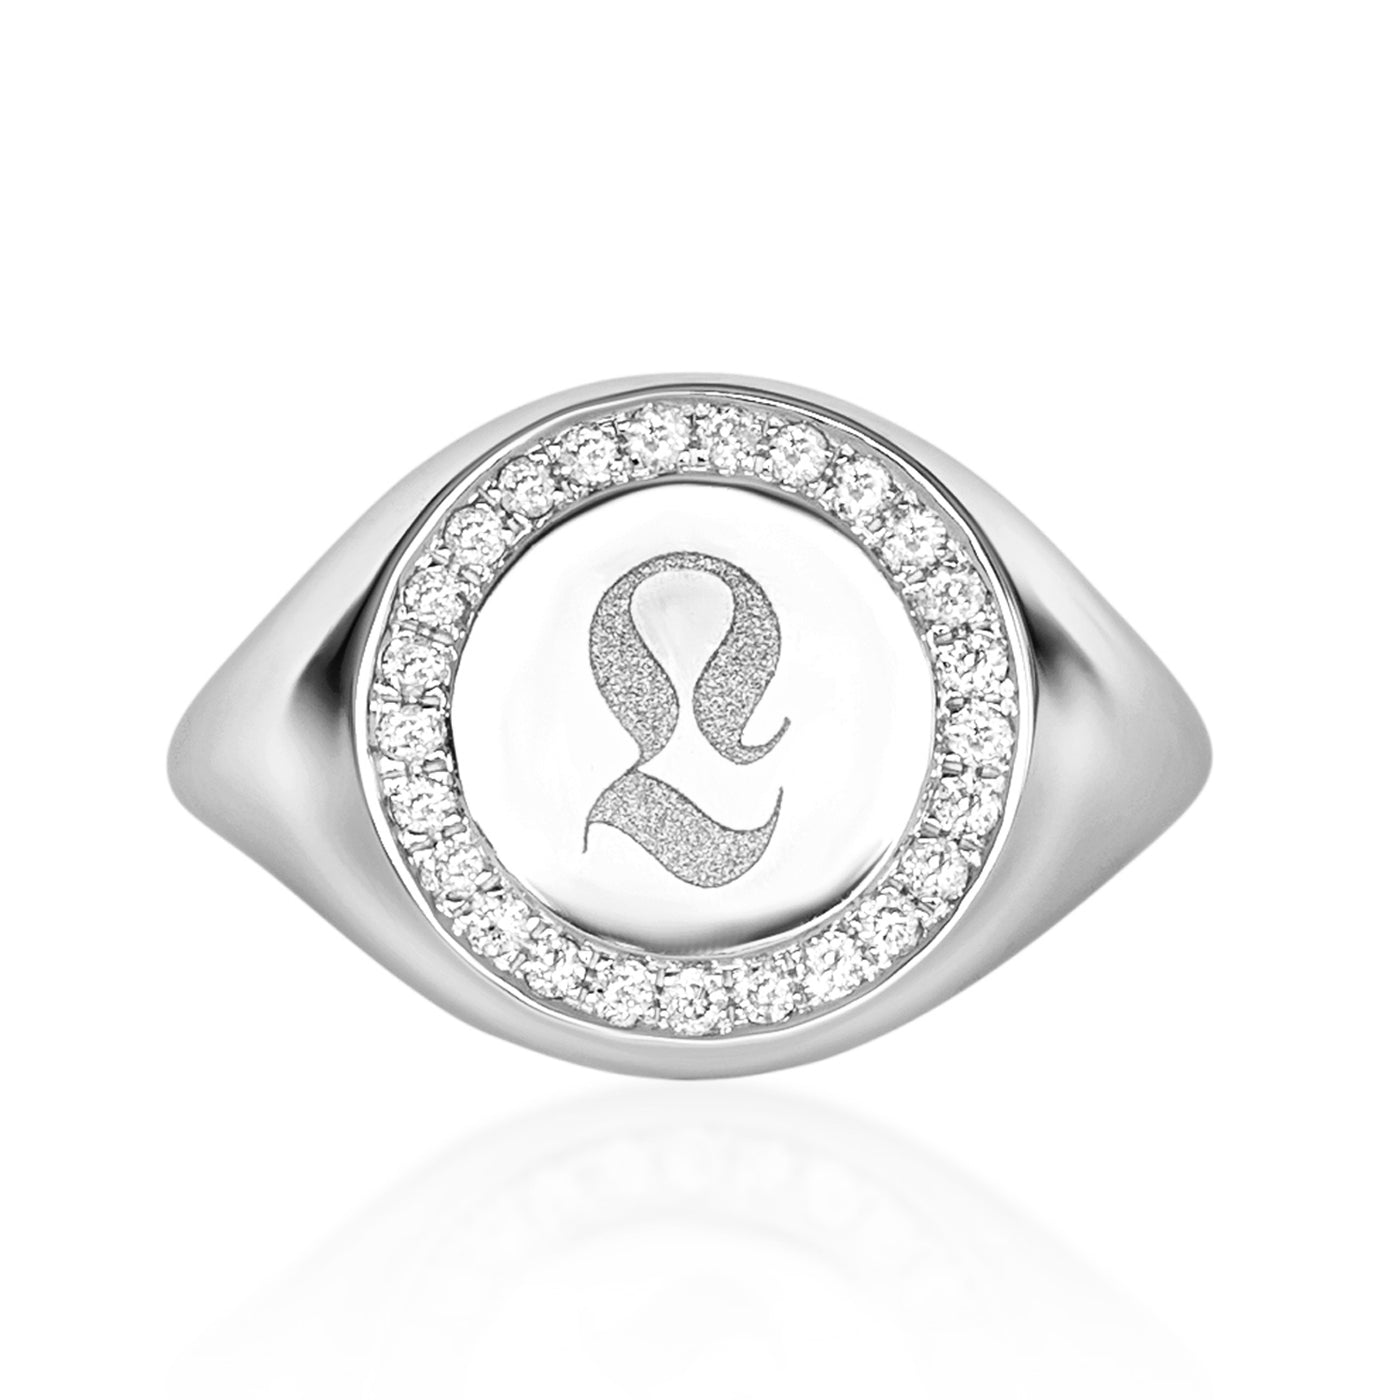 Initial Pinky Signet Ring